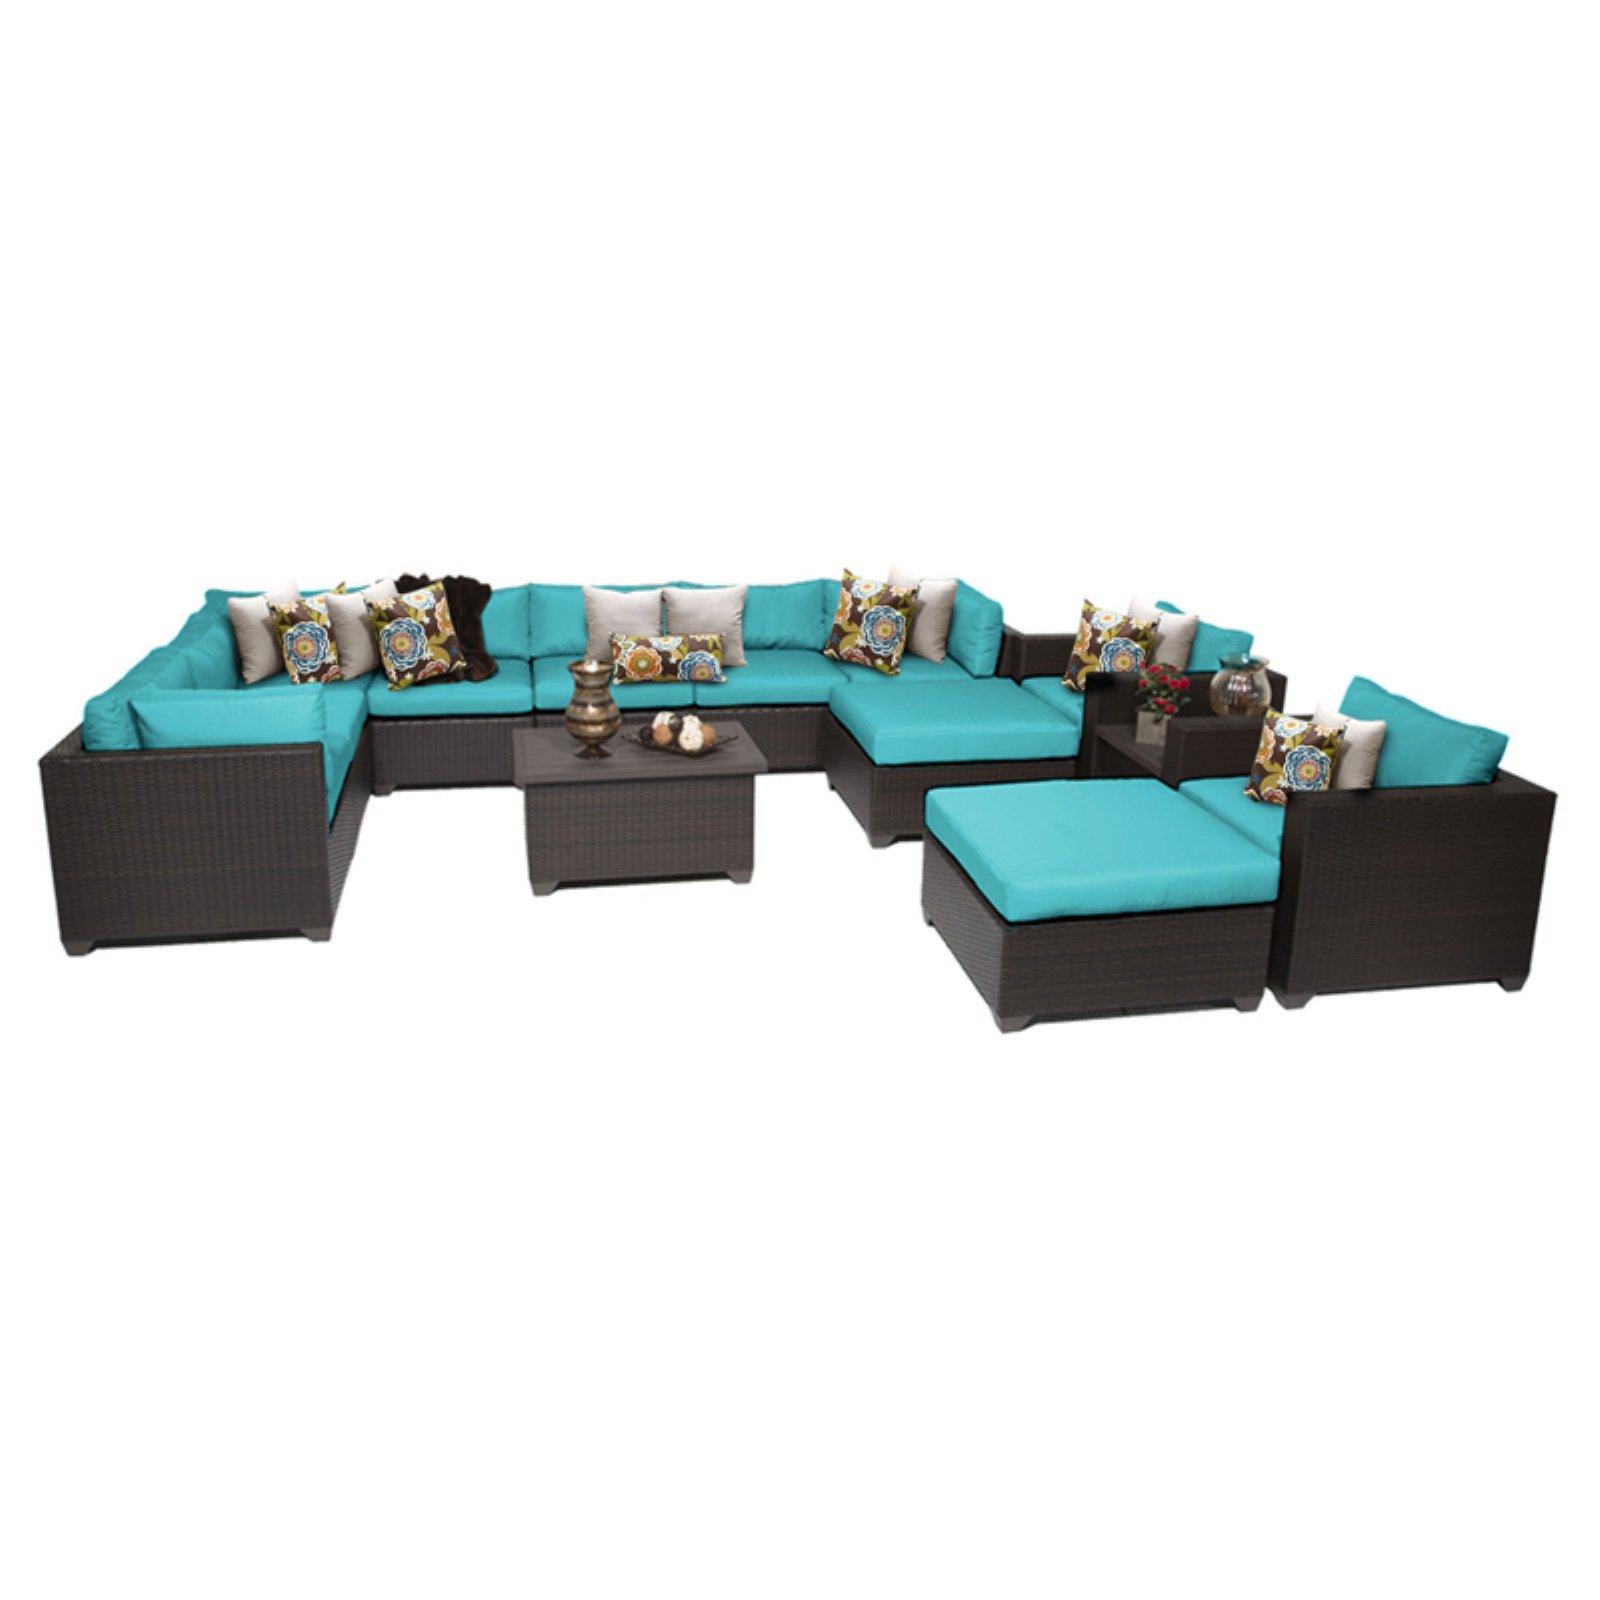 Belle 13 Piece Outdoor Wicker Patio Furniture Set 13a in Black - image 2 of 2